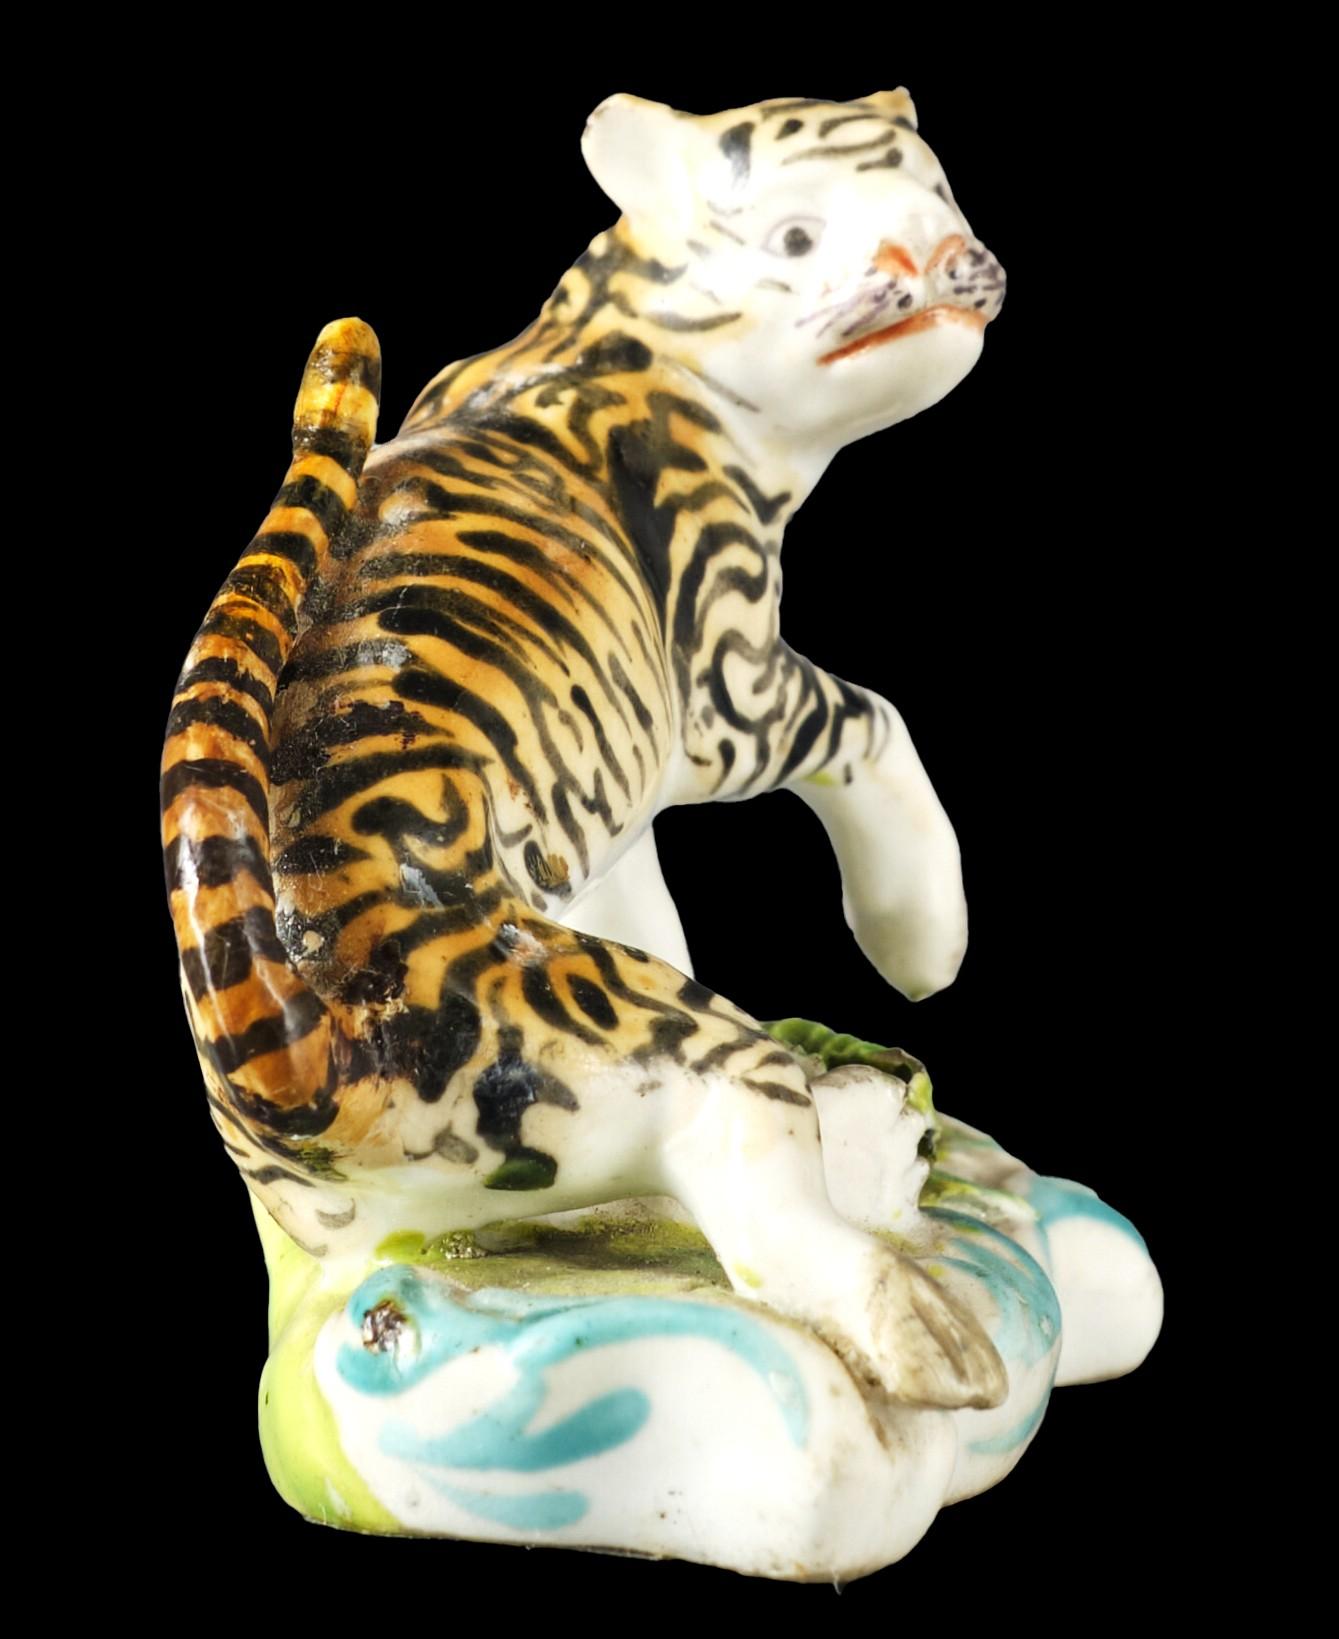 Georgian A Very Rare Early 19th C. Derby Porcelain Figure of a Tiger, England Circa 1800 For Sale